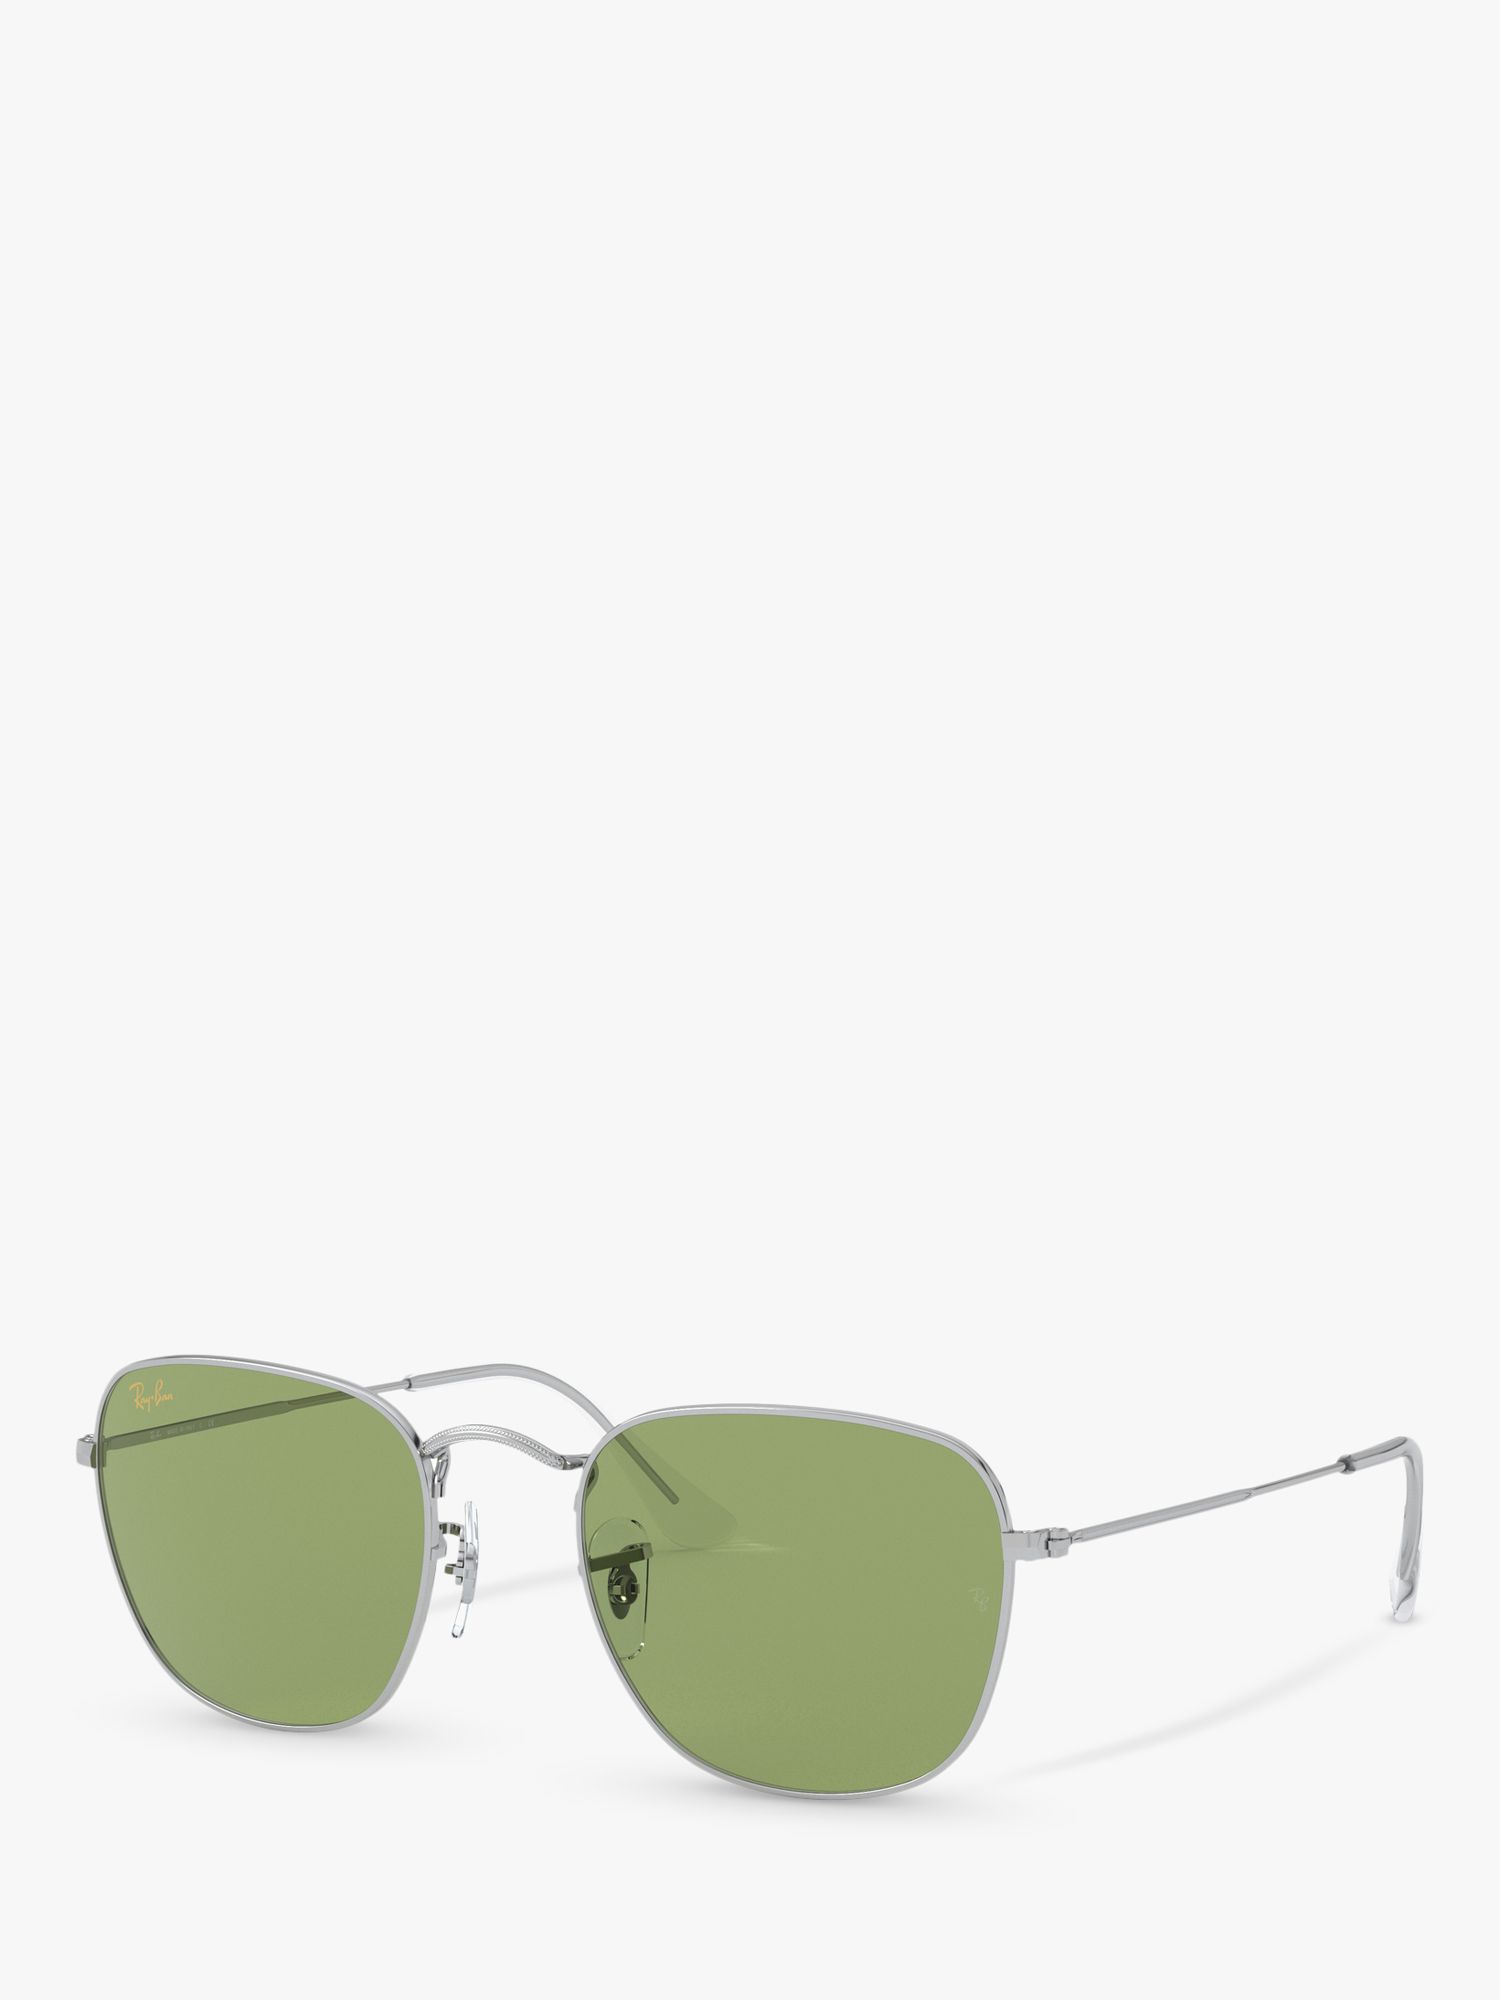 Ray-Ban RB3857 Frank Unisex Square Sunglasses, Silver/Light Green